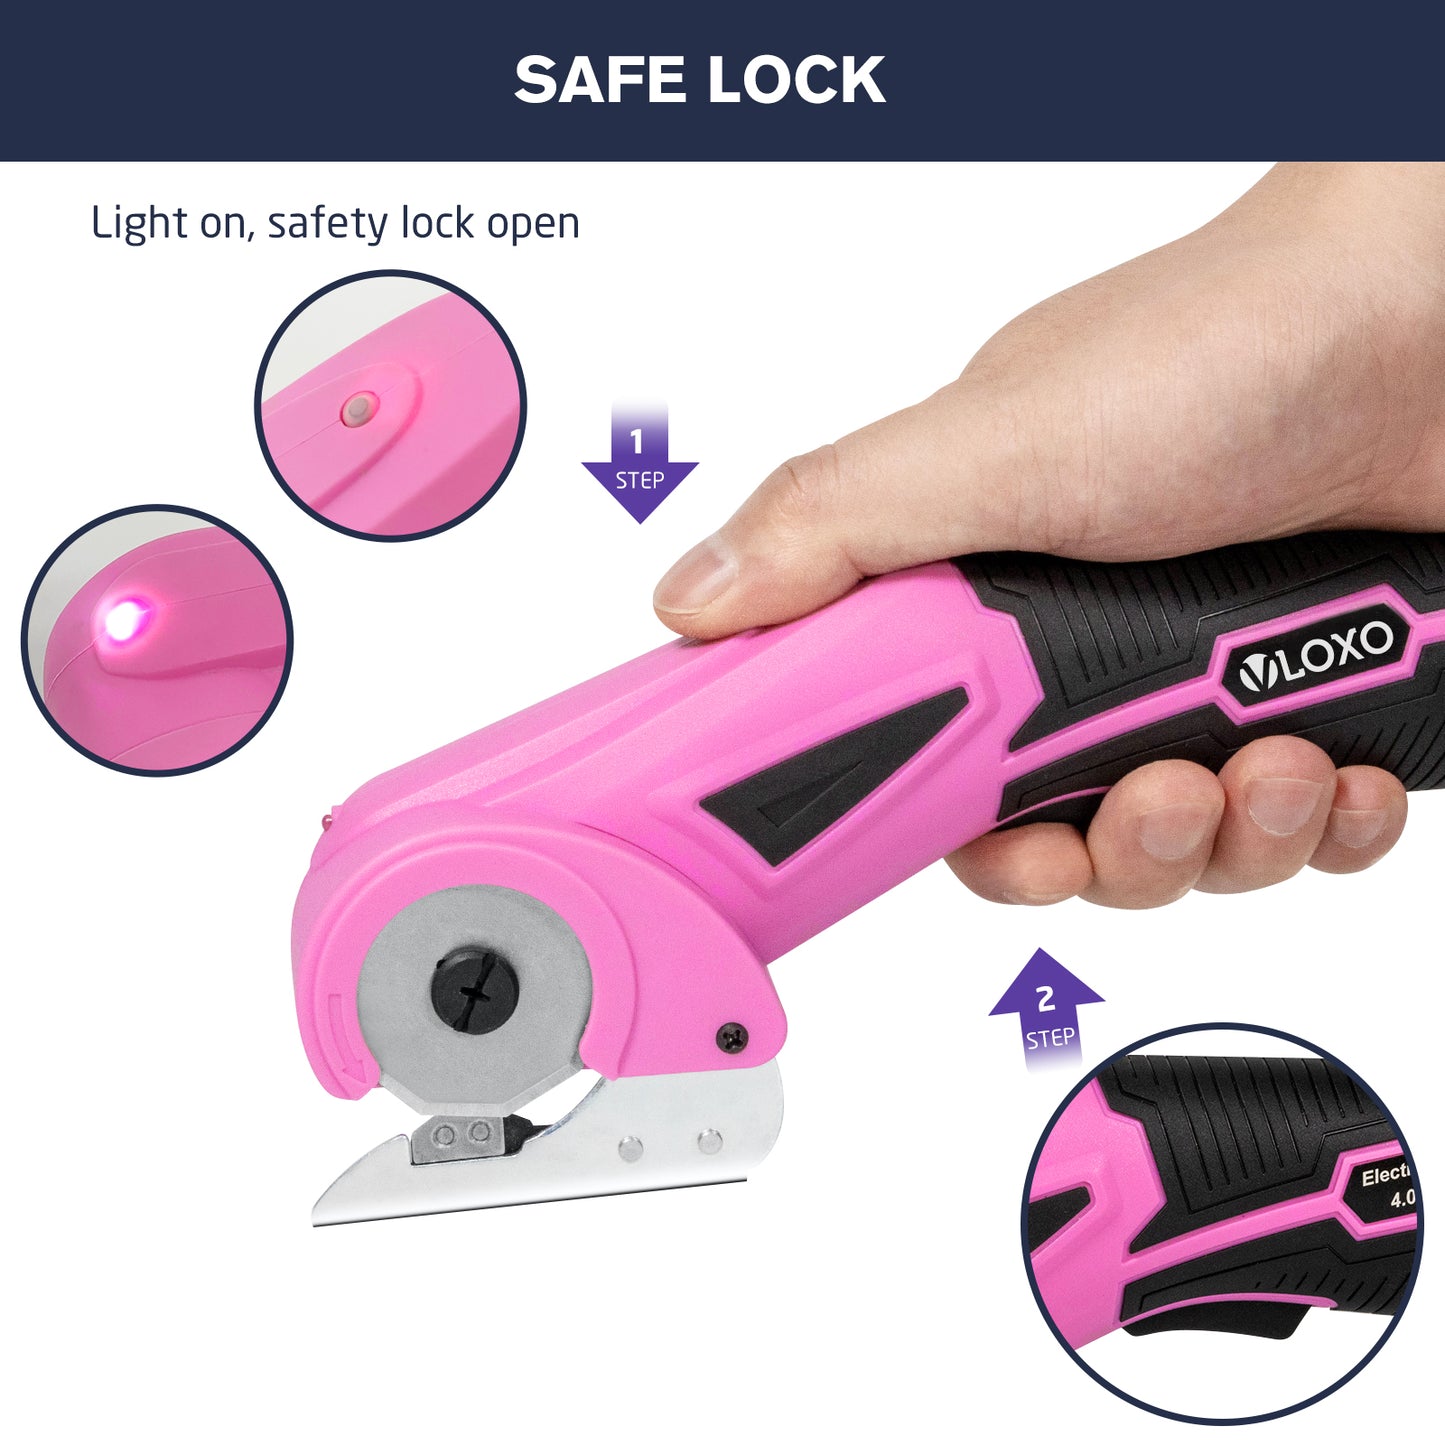 VLOXO Cordless Electric Scissors with Safety Lock 4.2V Rotary Cutter with Automatic Sharpening System For Fabric Carpet Leather Felt and More